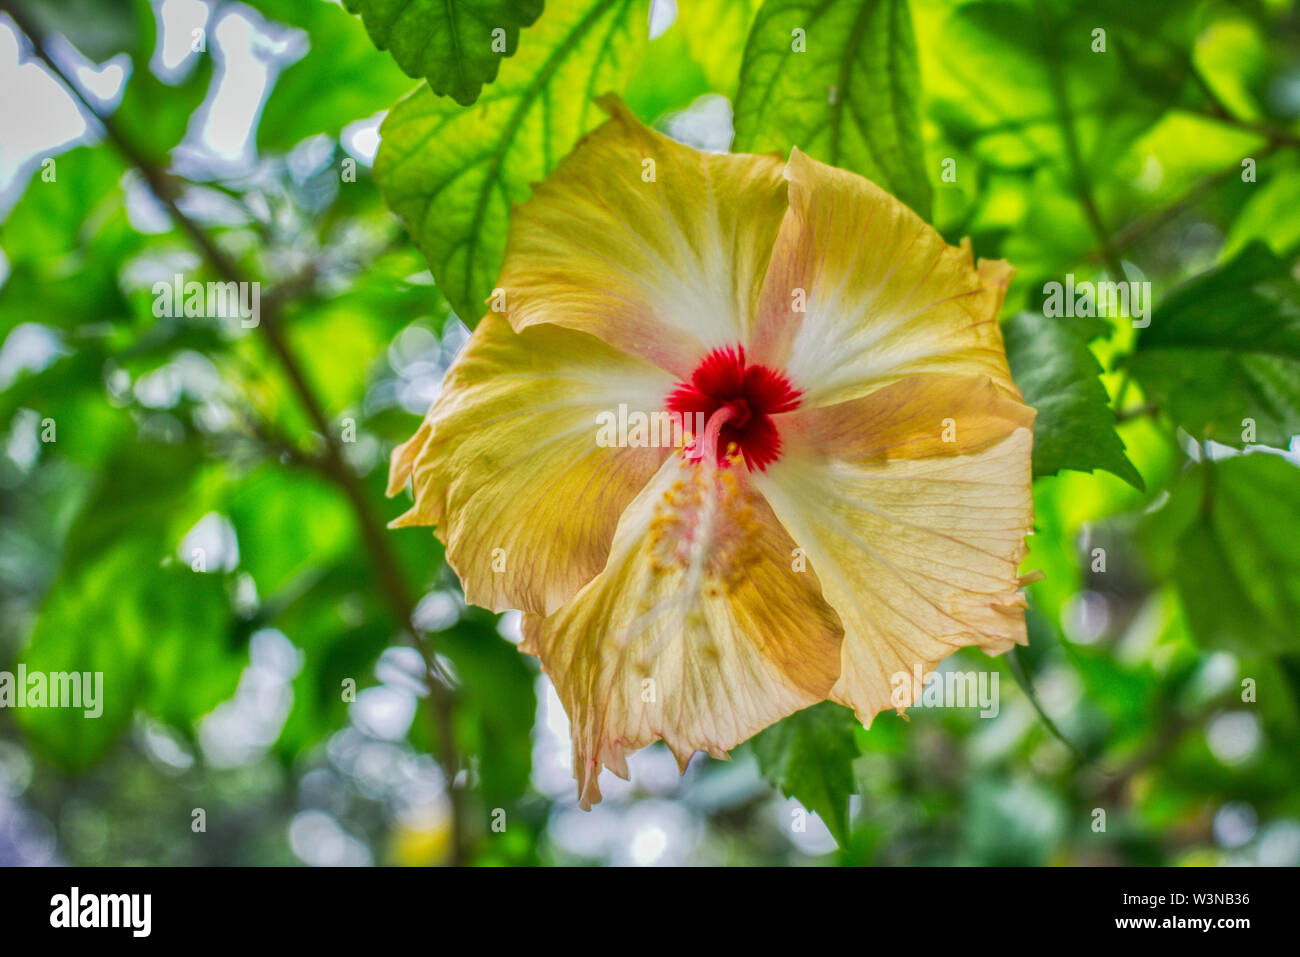 This unique photo shows the beautiful yellow flower of a big hibiscus shrub. This picture was taken in the Maldives Stock Photo